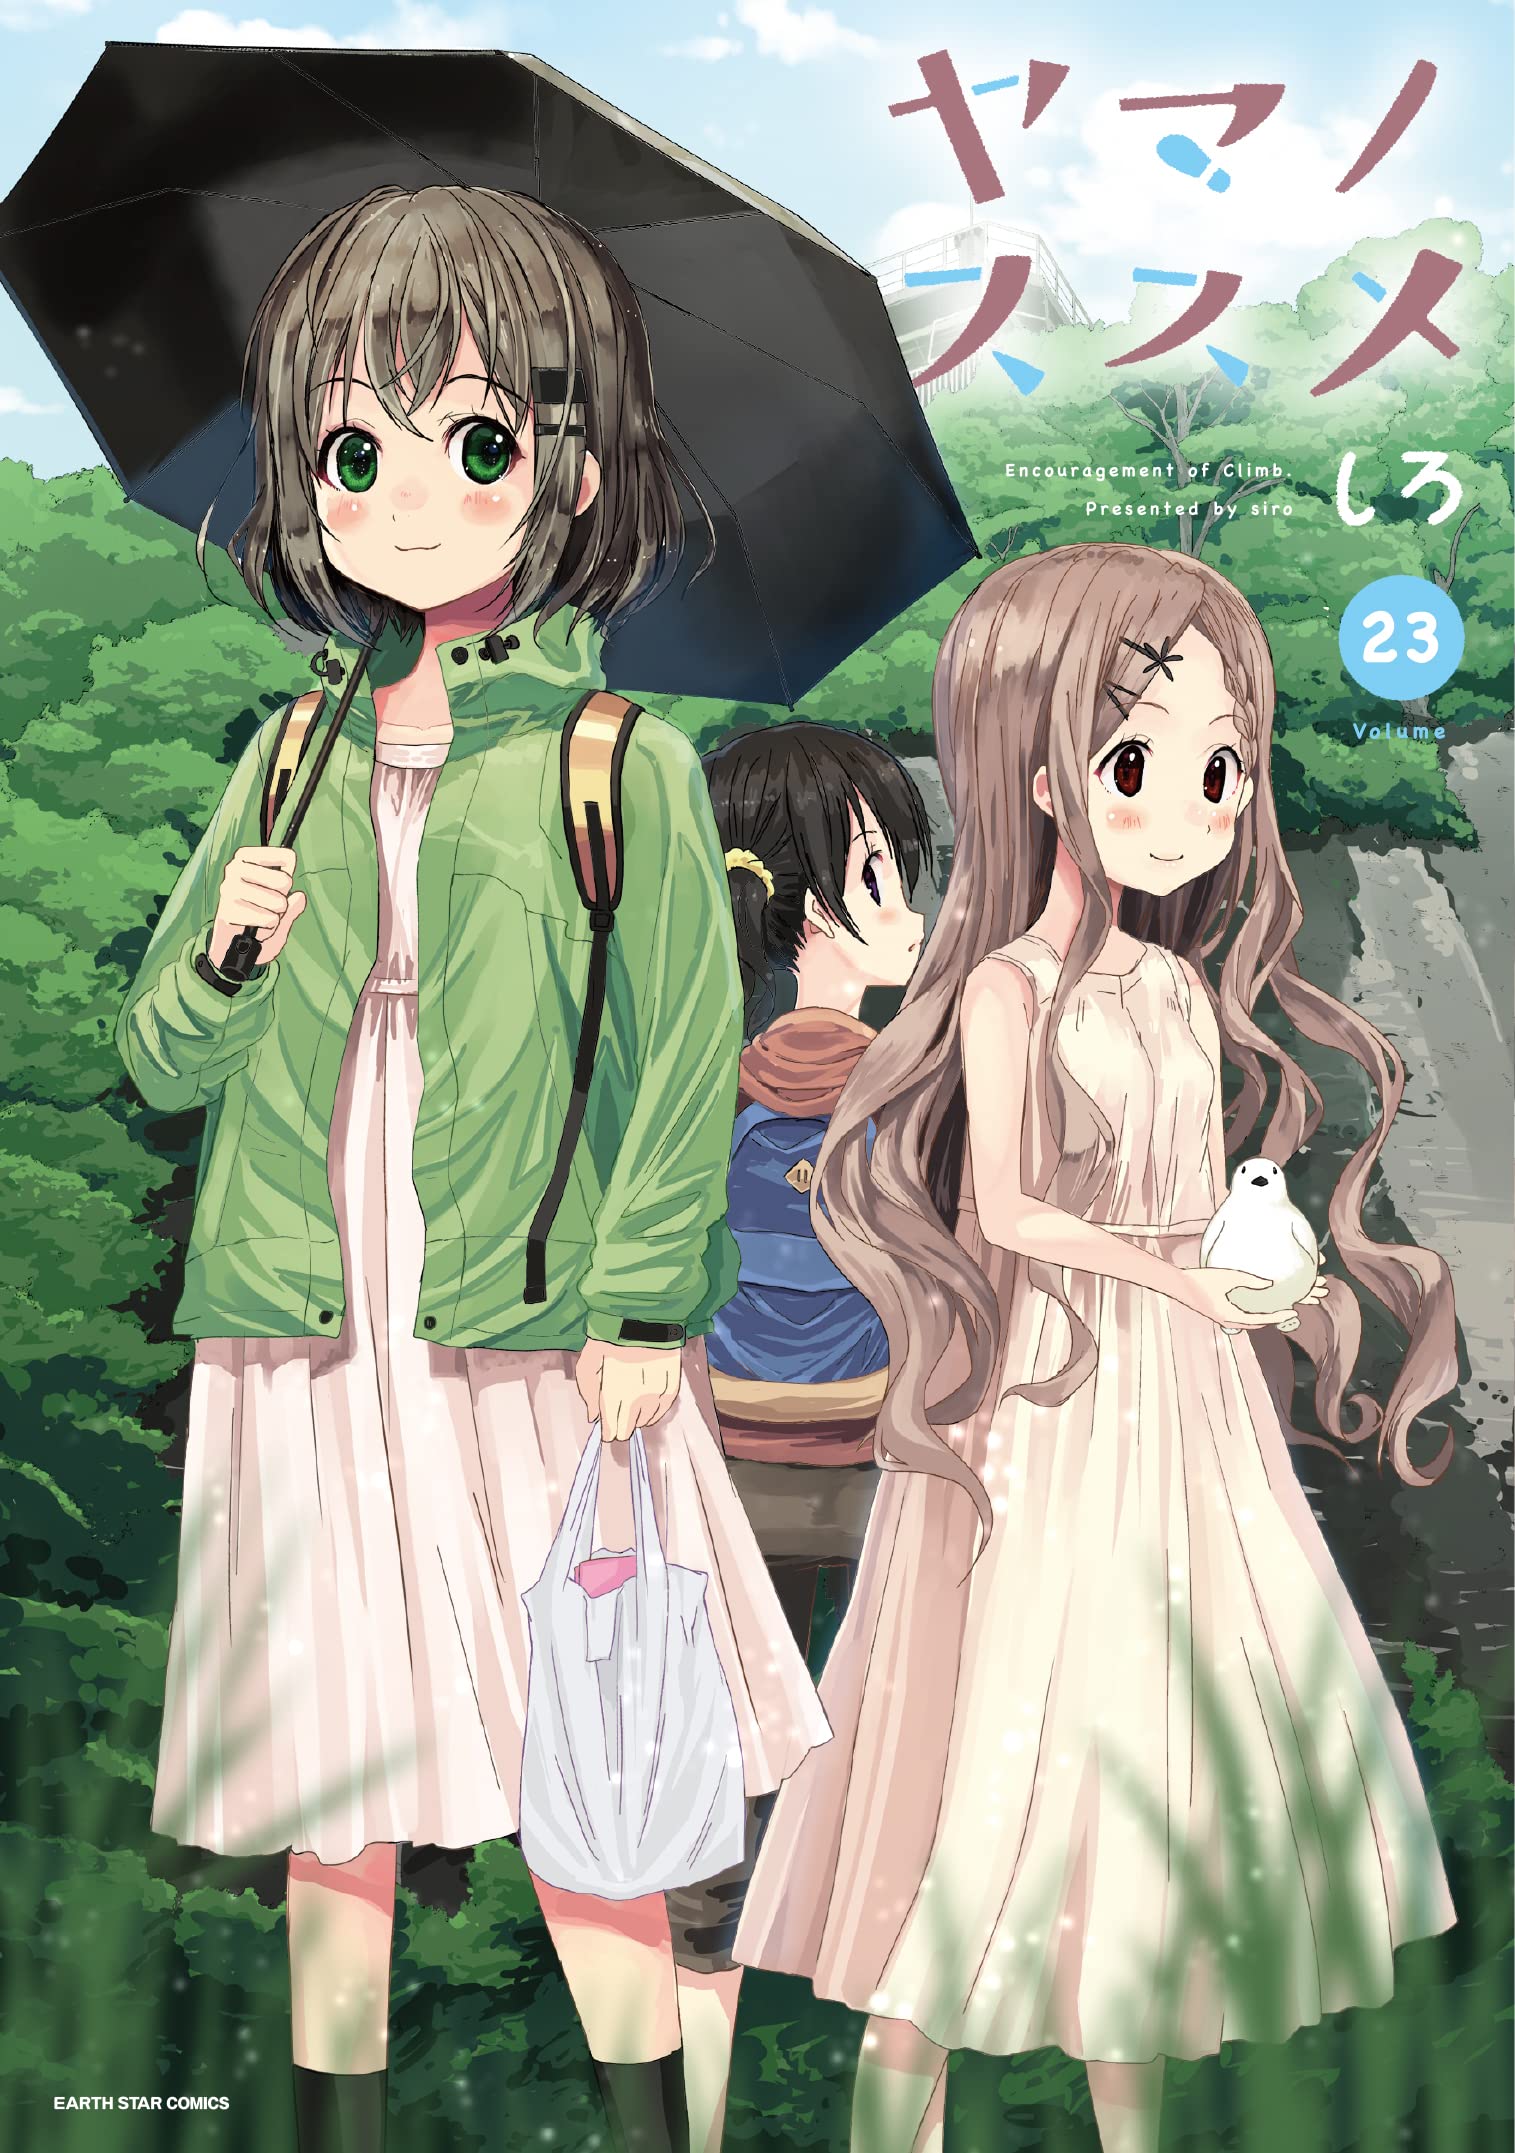 Encouragement of Climb (Yama no Susume) 23 – Japanese Book Store